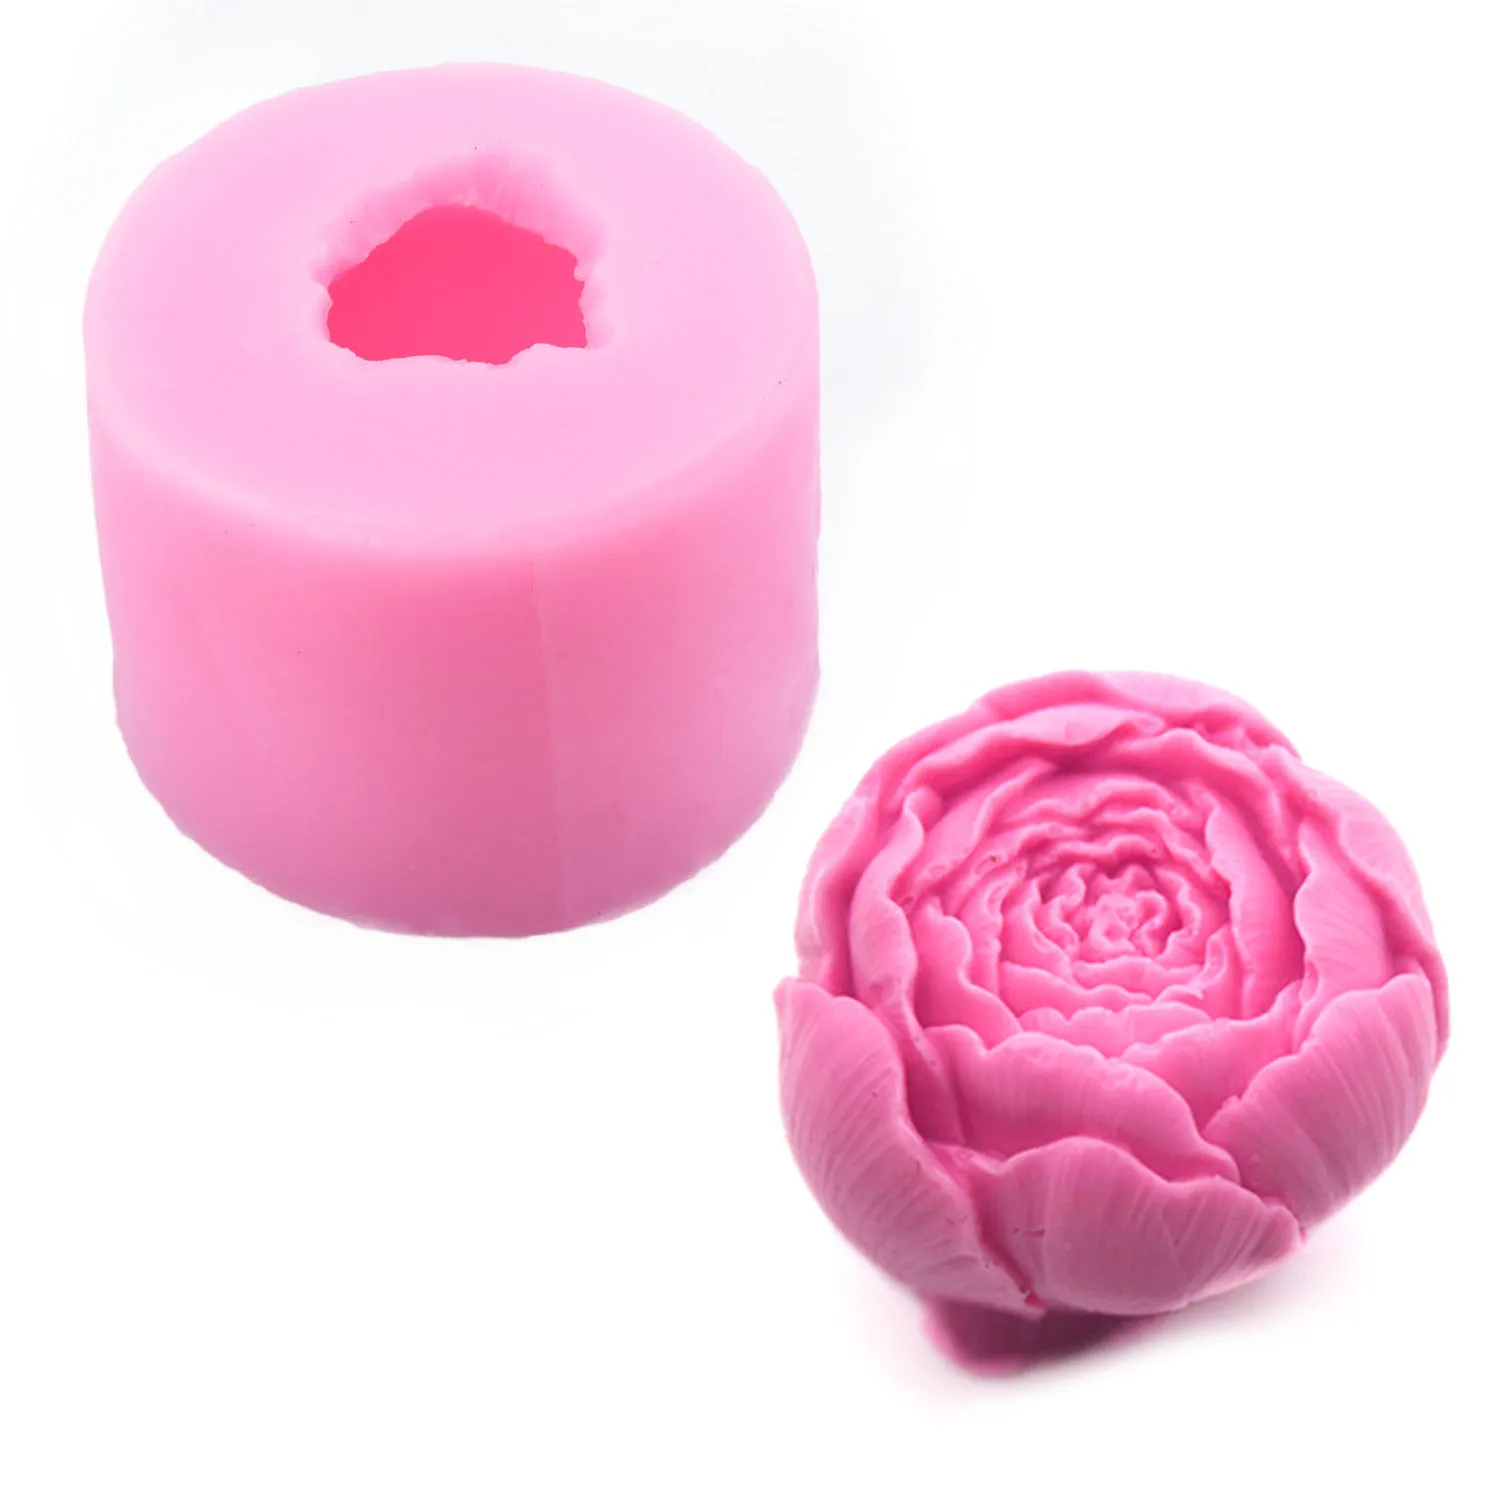 Details about   US 3D Rose Flower Silicone Fondant Cake Mold Plant Chocolate DIY Baking Mould 